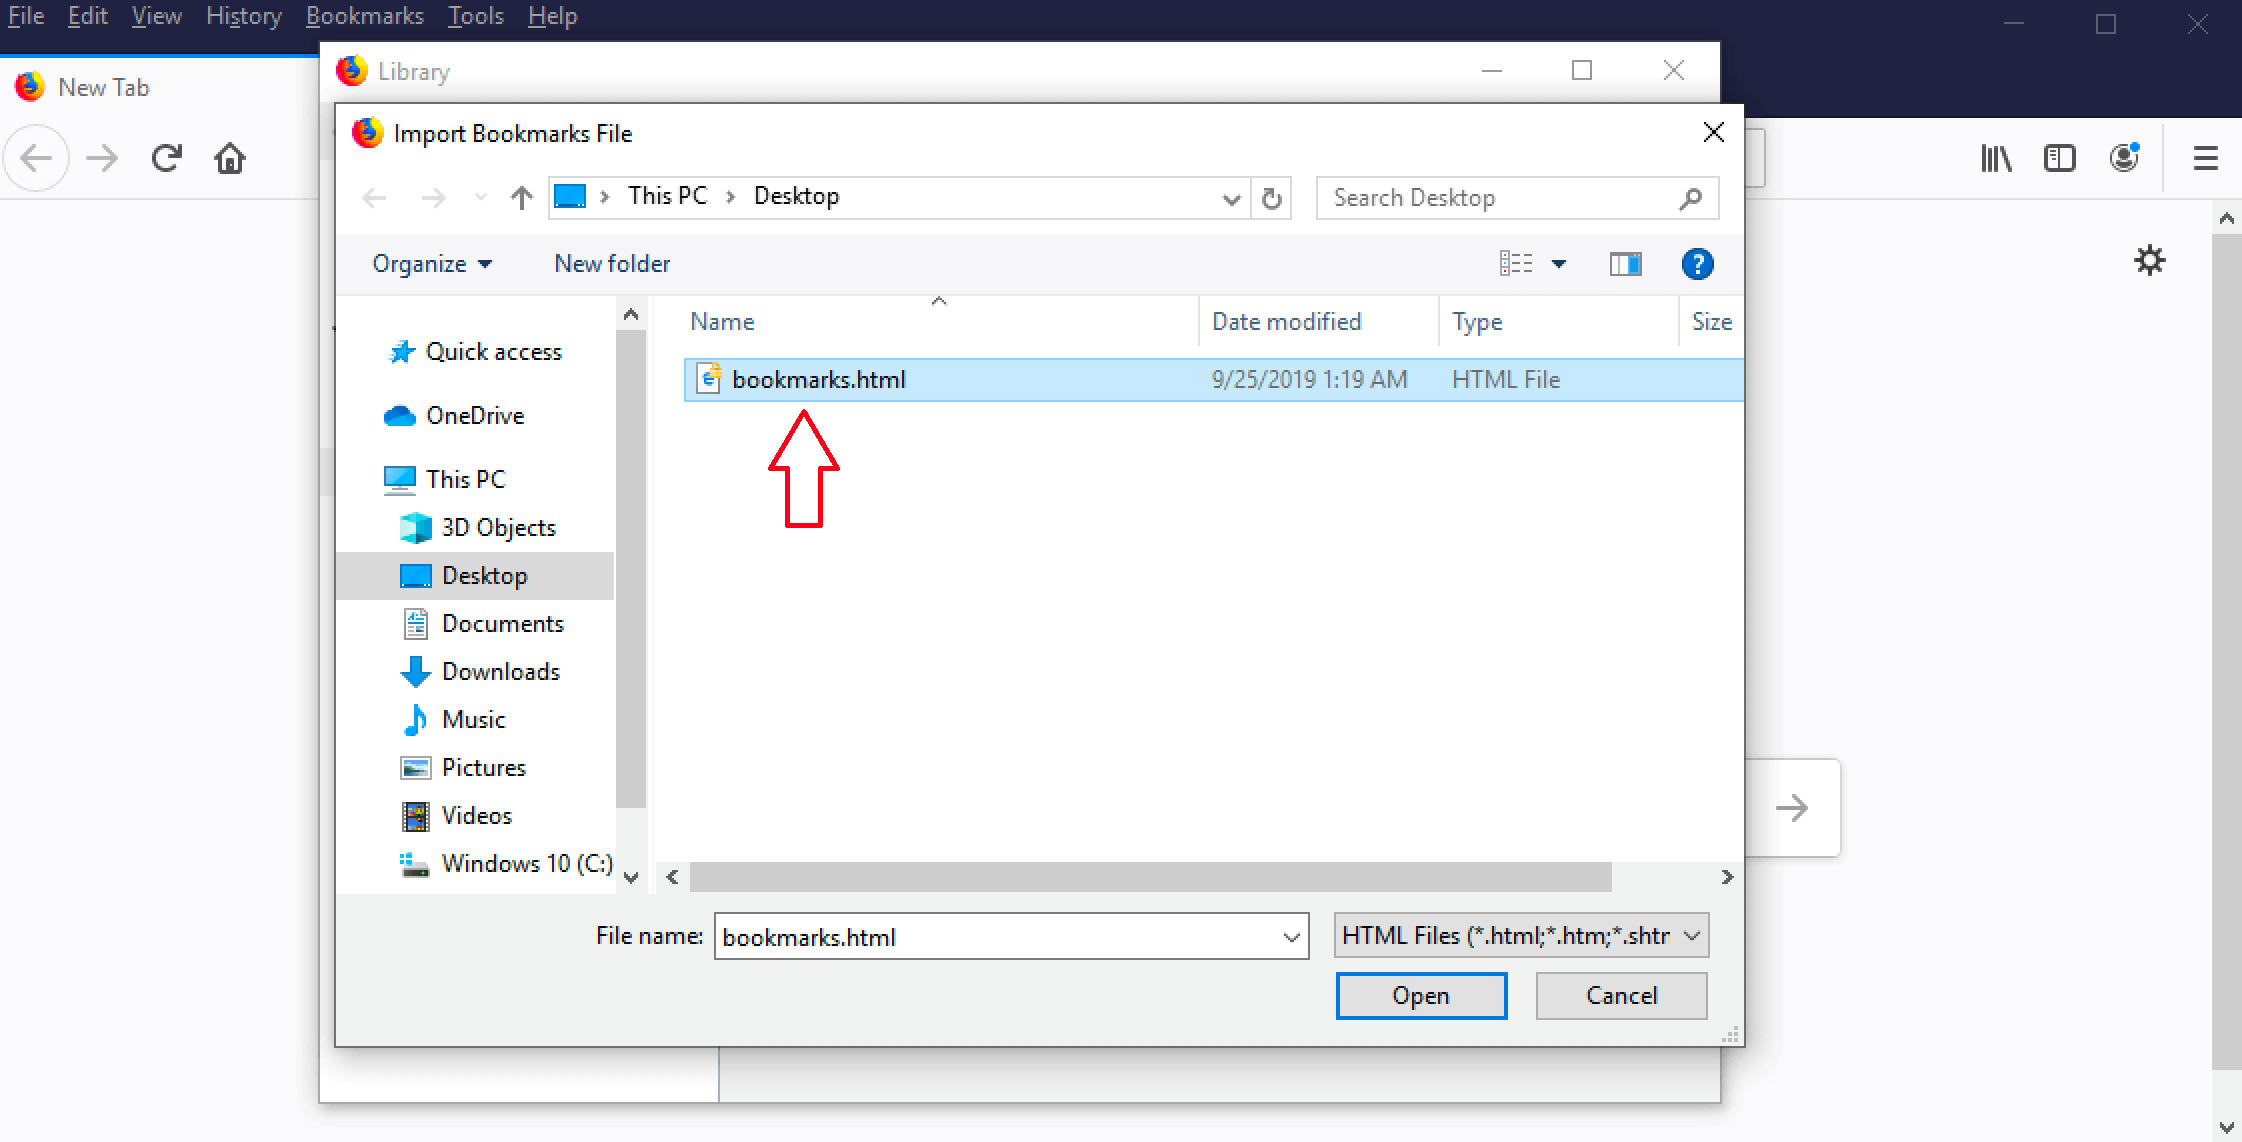 Screenshot: “Import Bookmarks File” and select HTML file